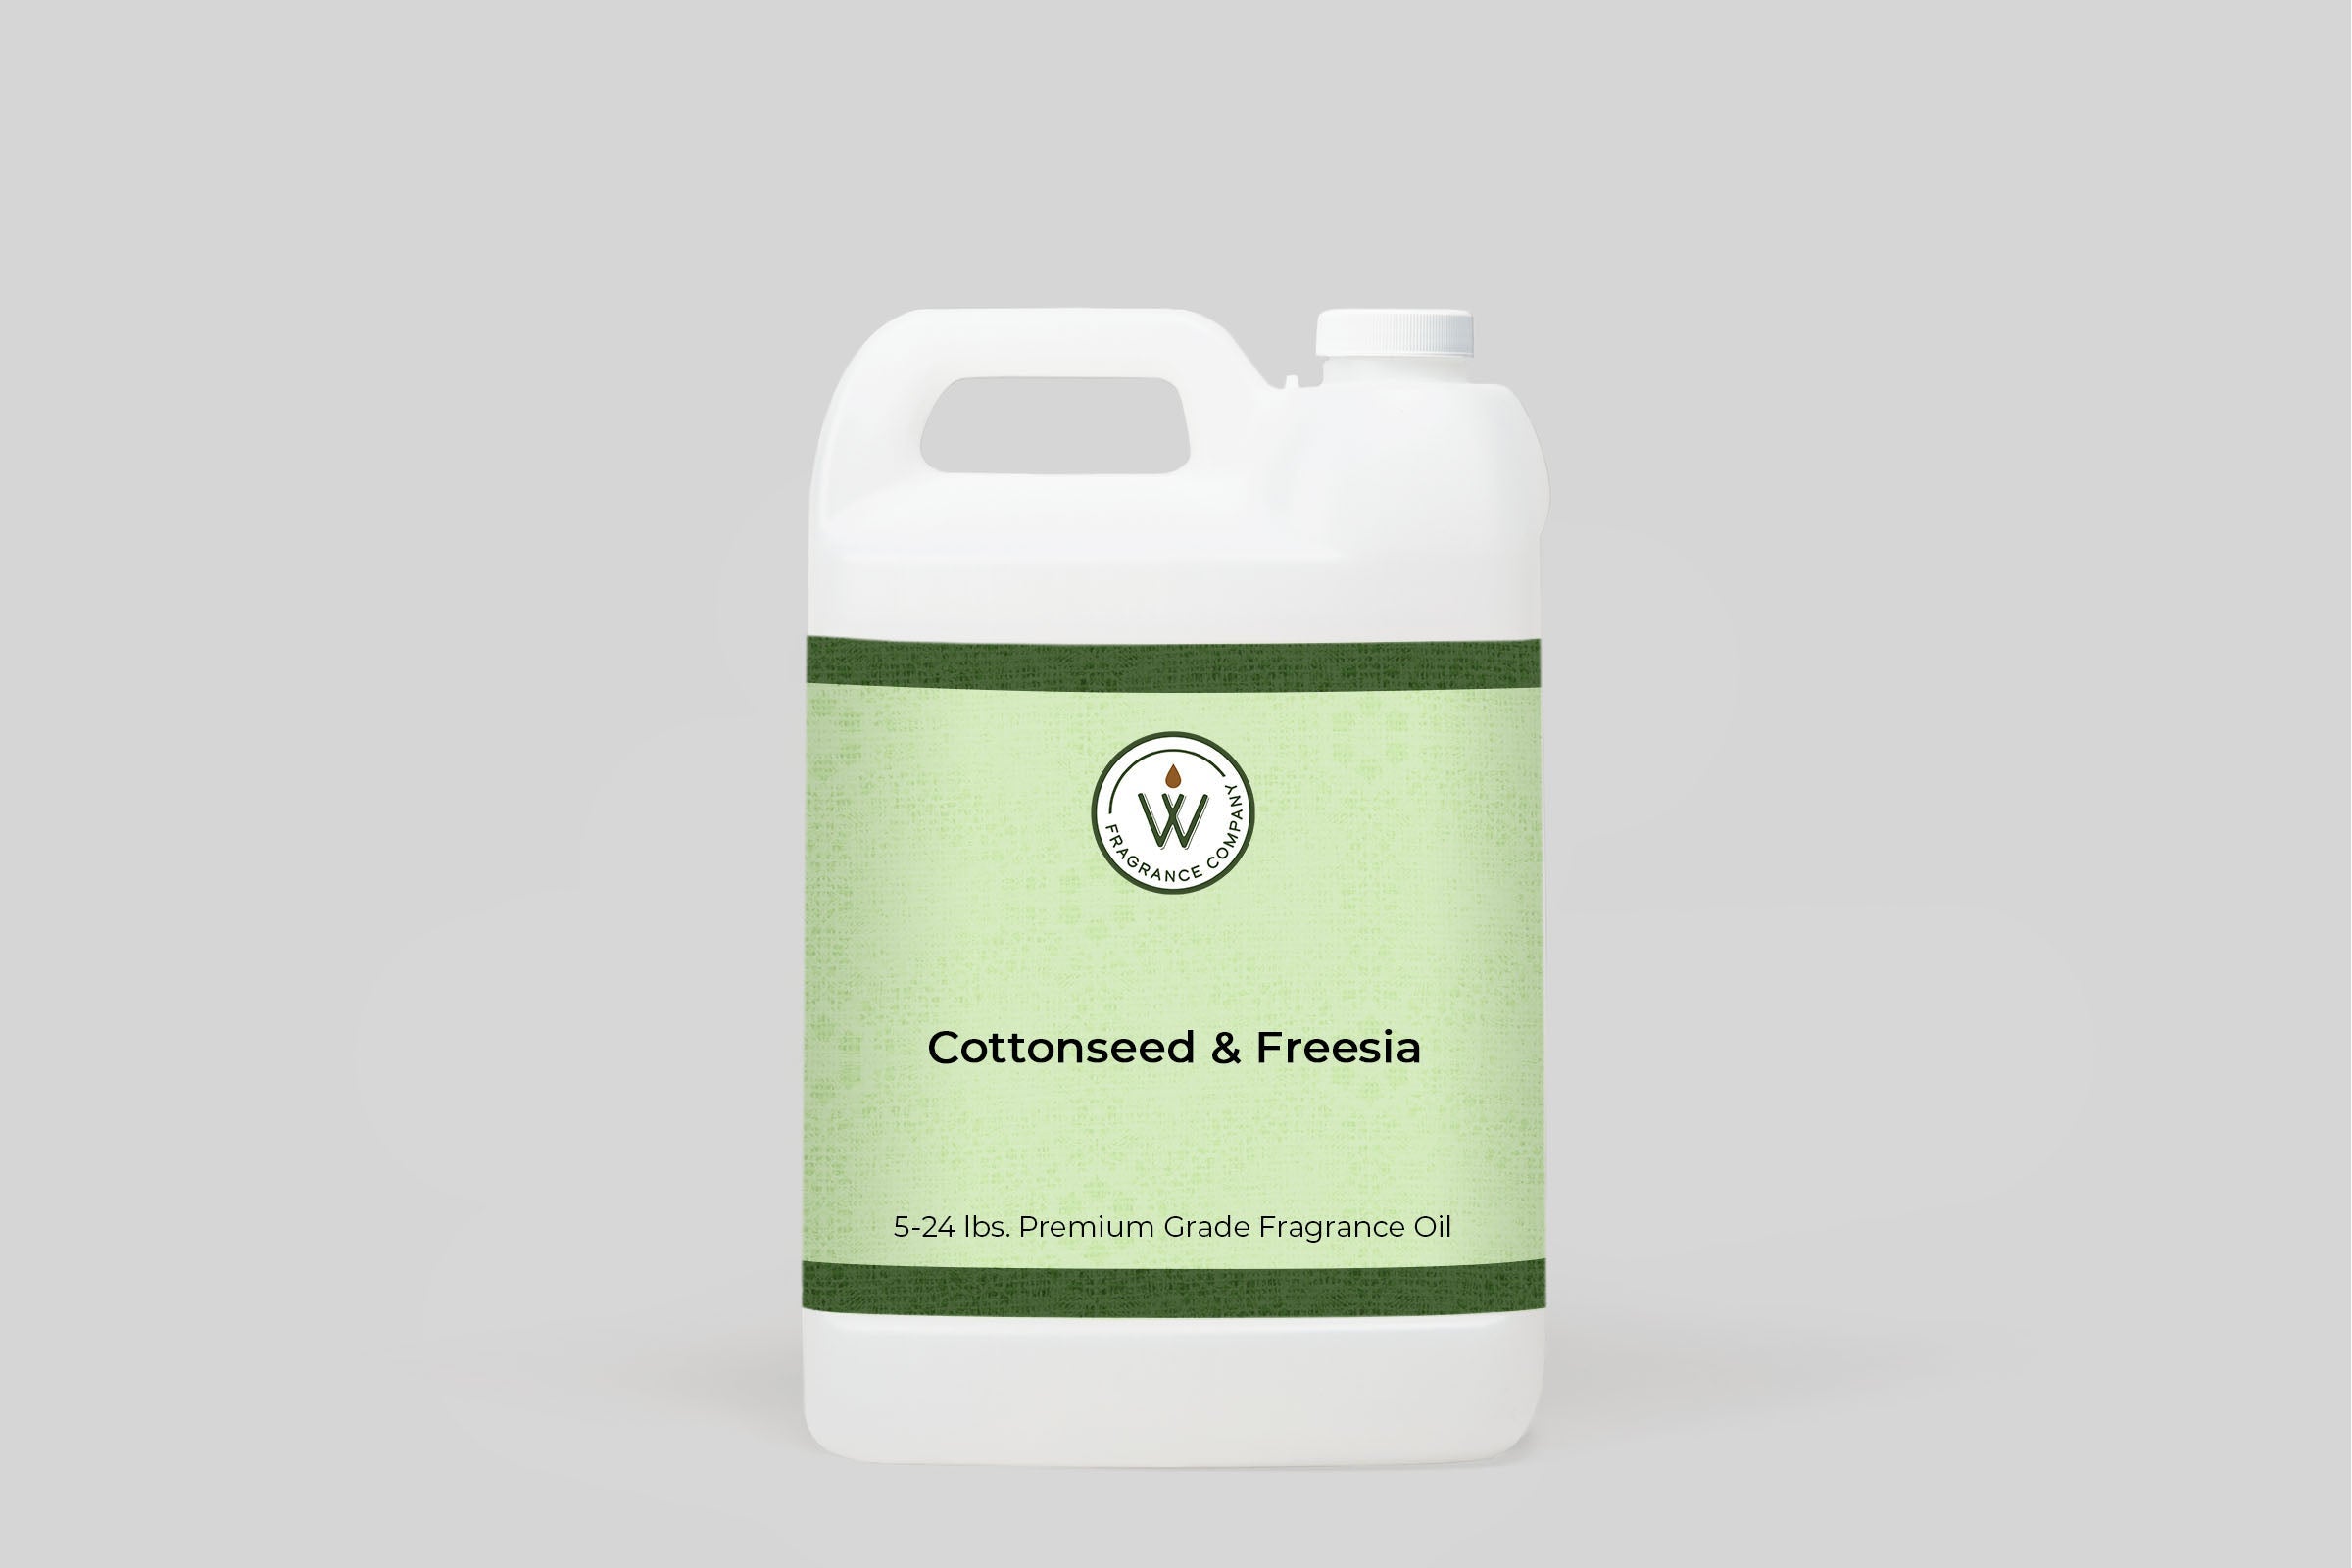 Cottonseed & Freesia Fragrance Oil